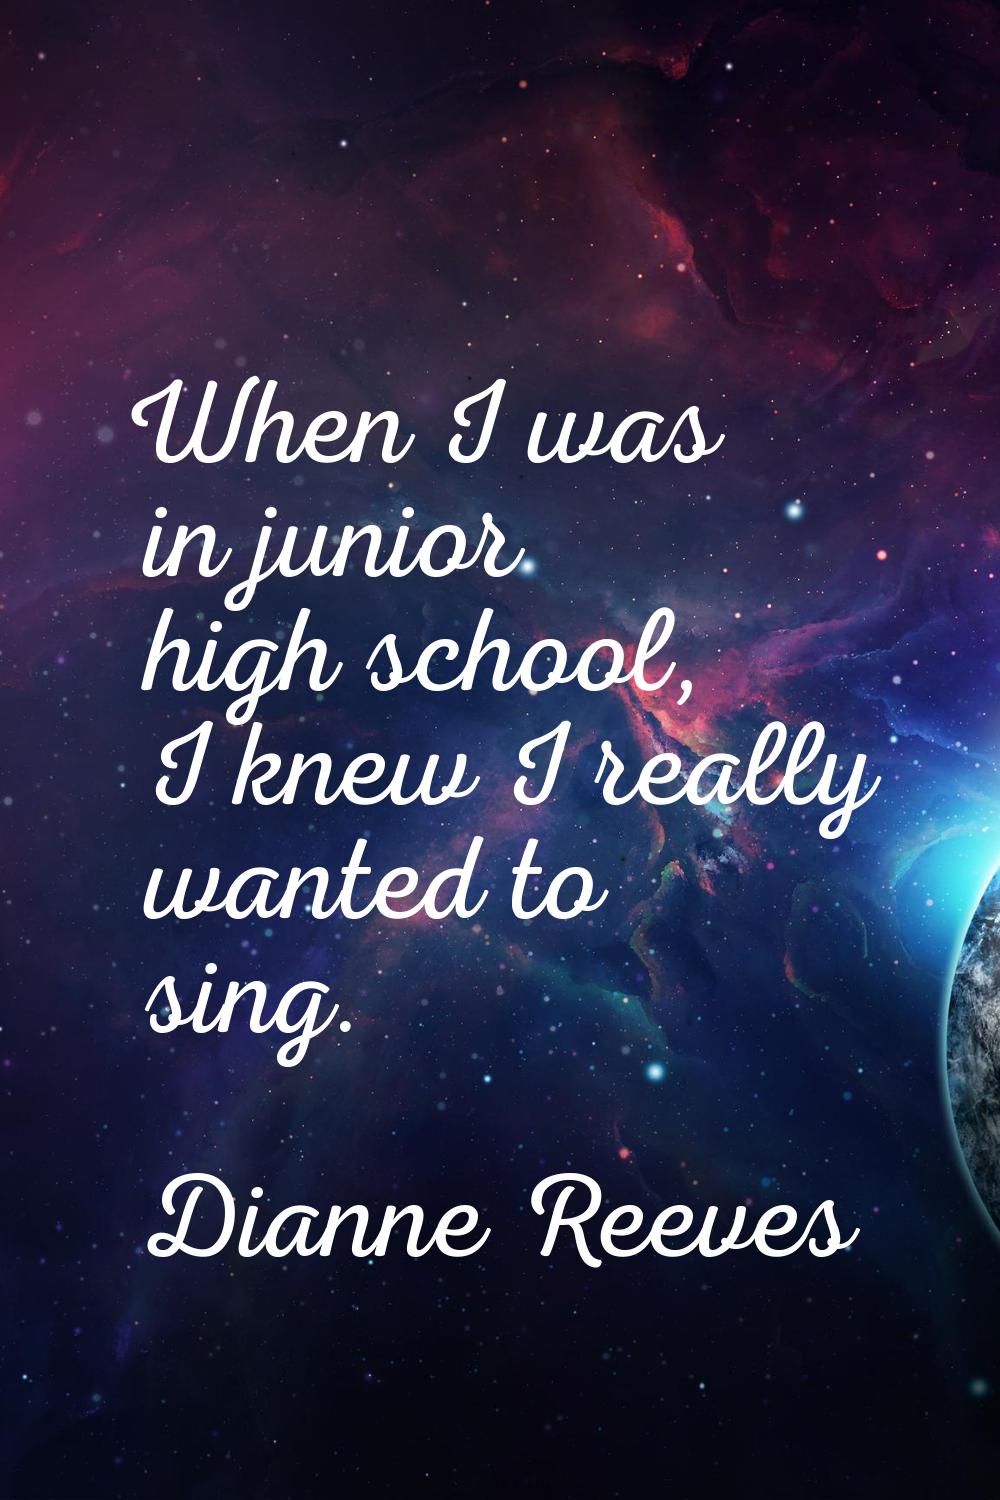 When I was in junior high school, I knew I really wanted to sing.